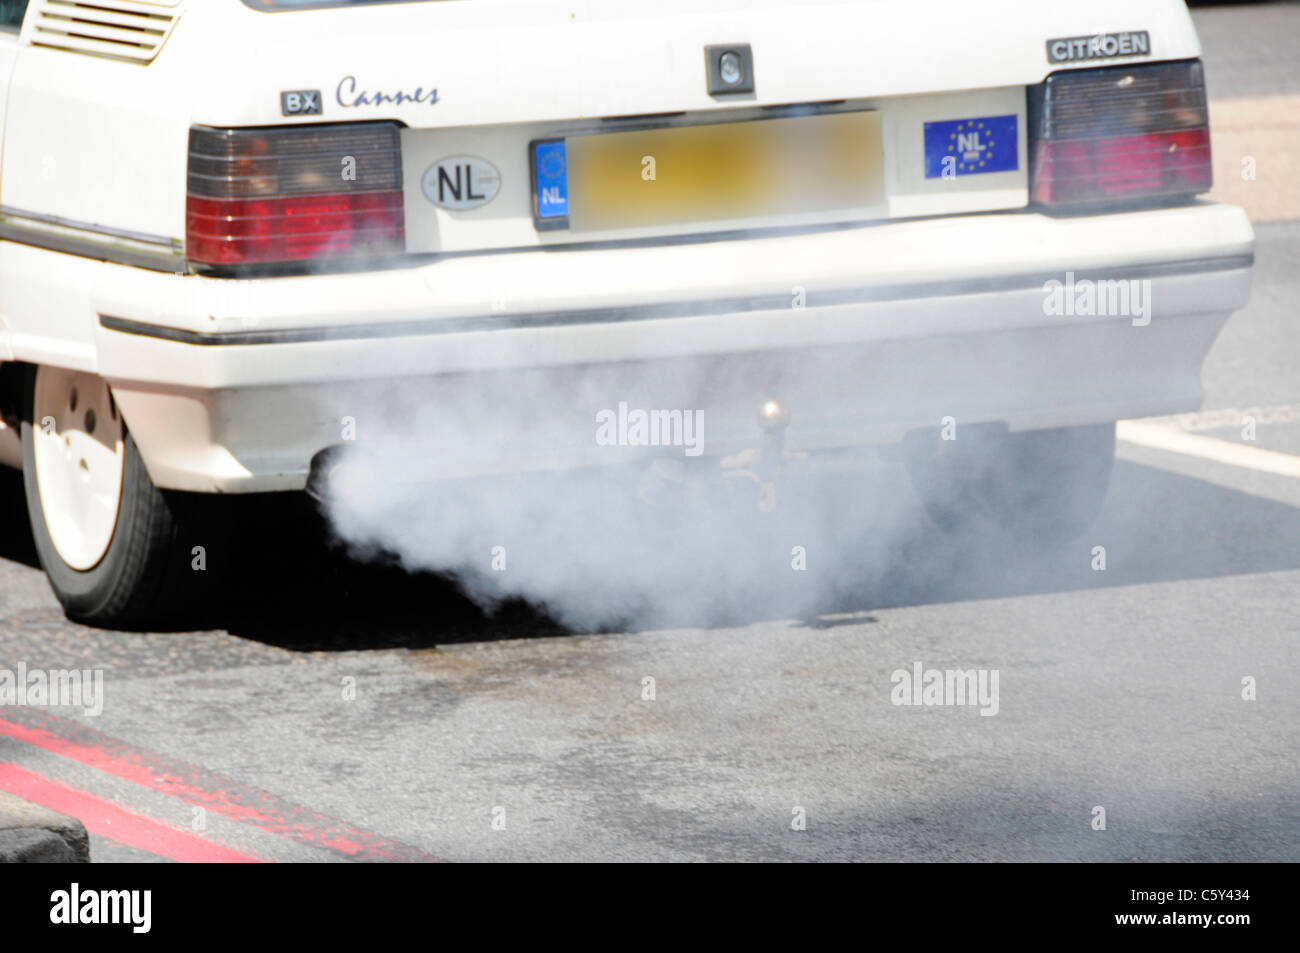 Dutch registered old Citroen car with defective polluting exhaust system fumes damaging environment driving on road London UK (obscured number plate) Stock Photo